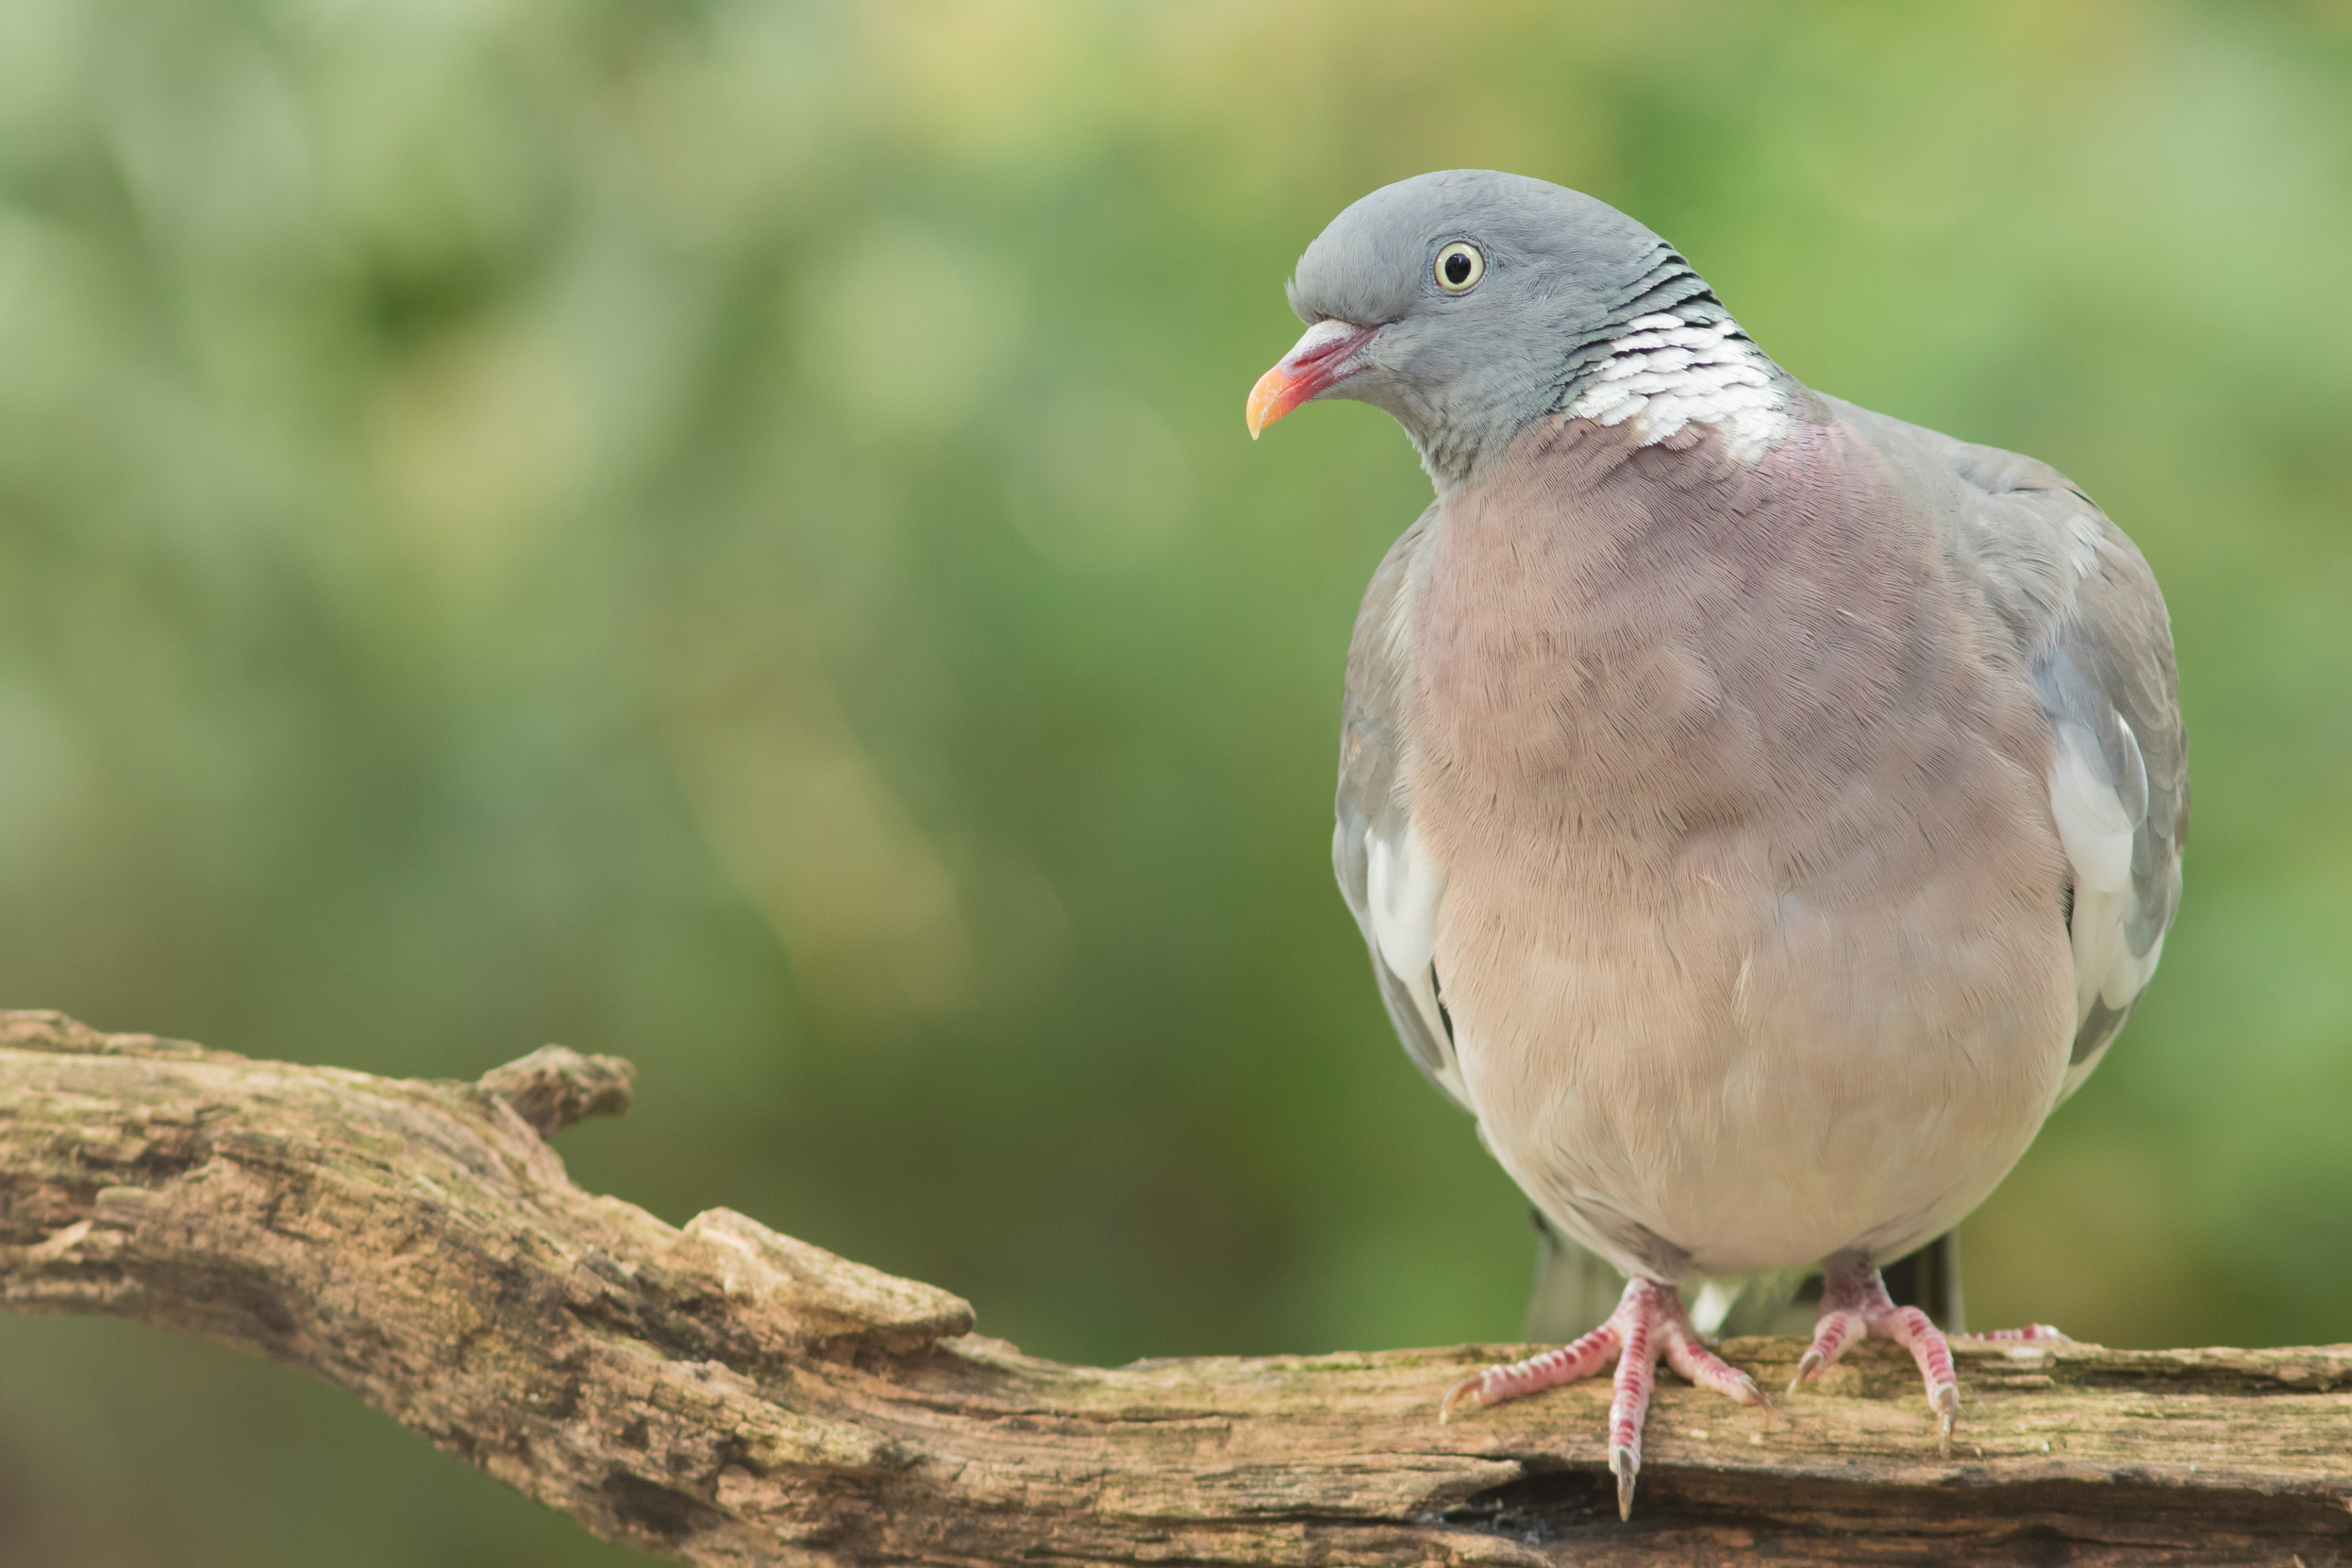 A lone Woodpigeon perched on a branch.